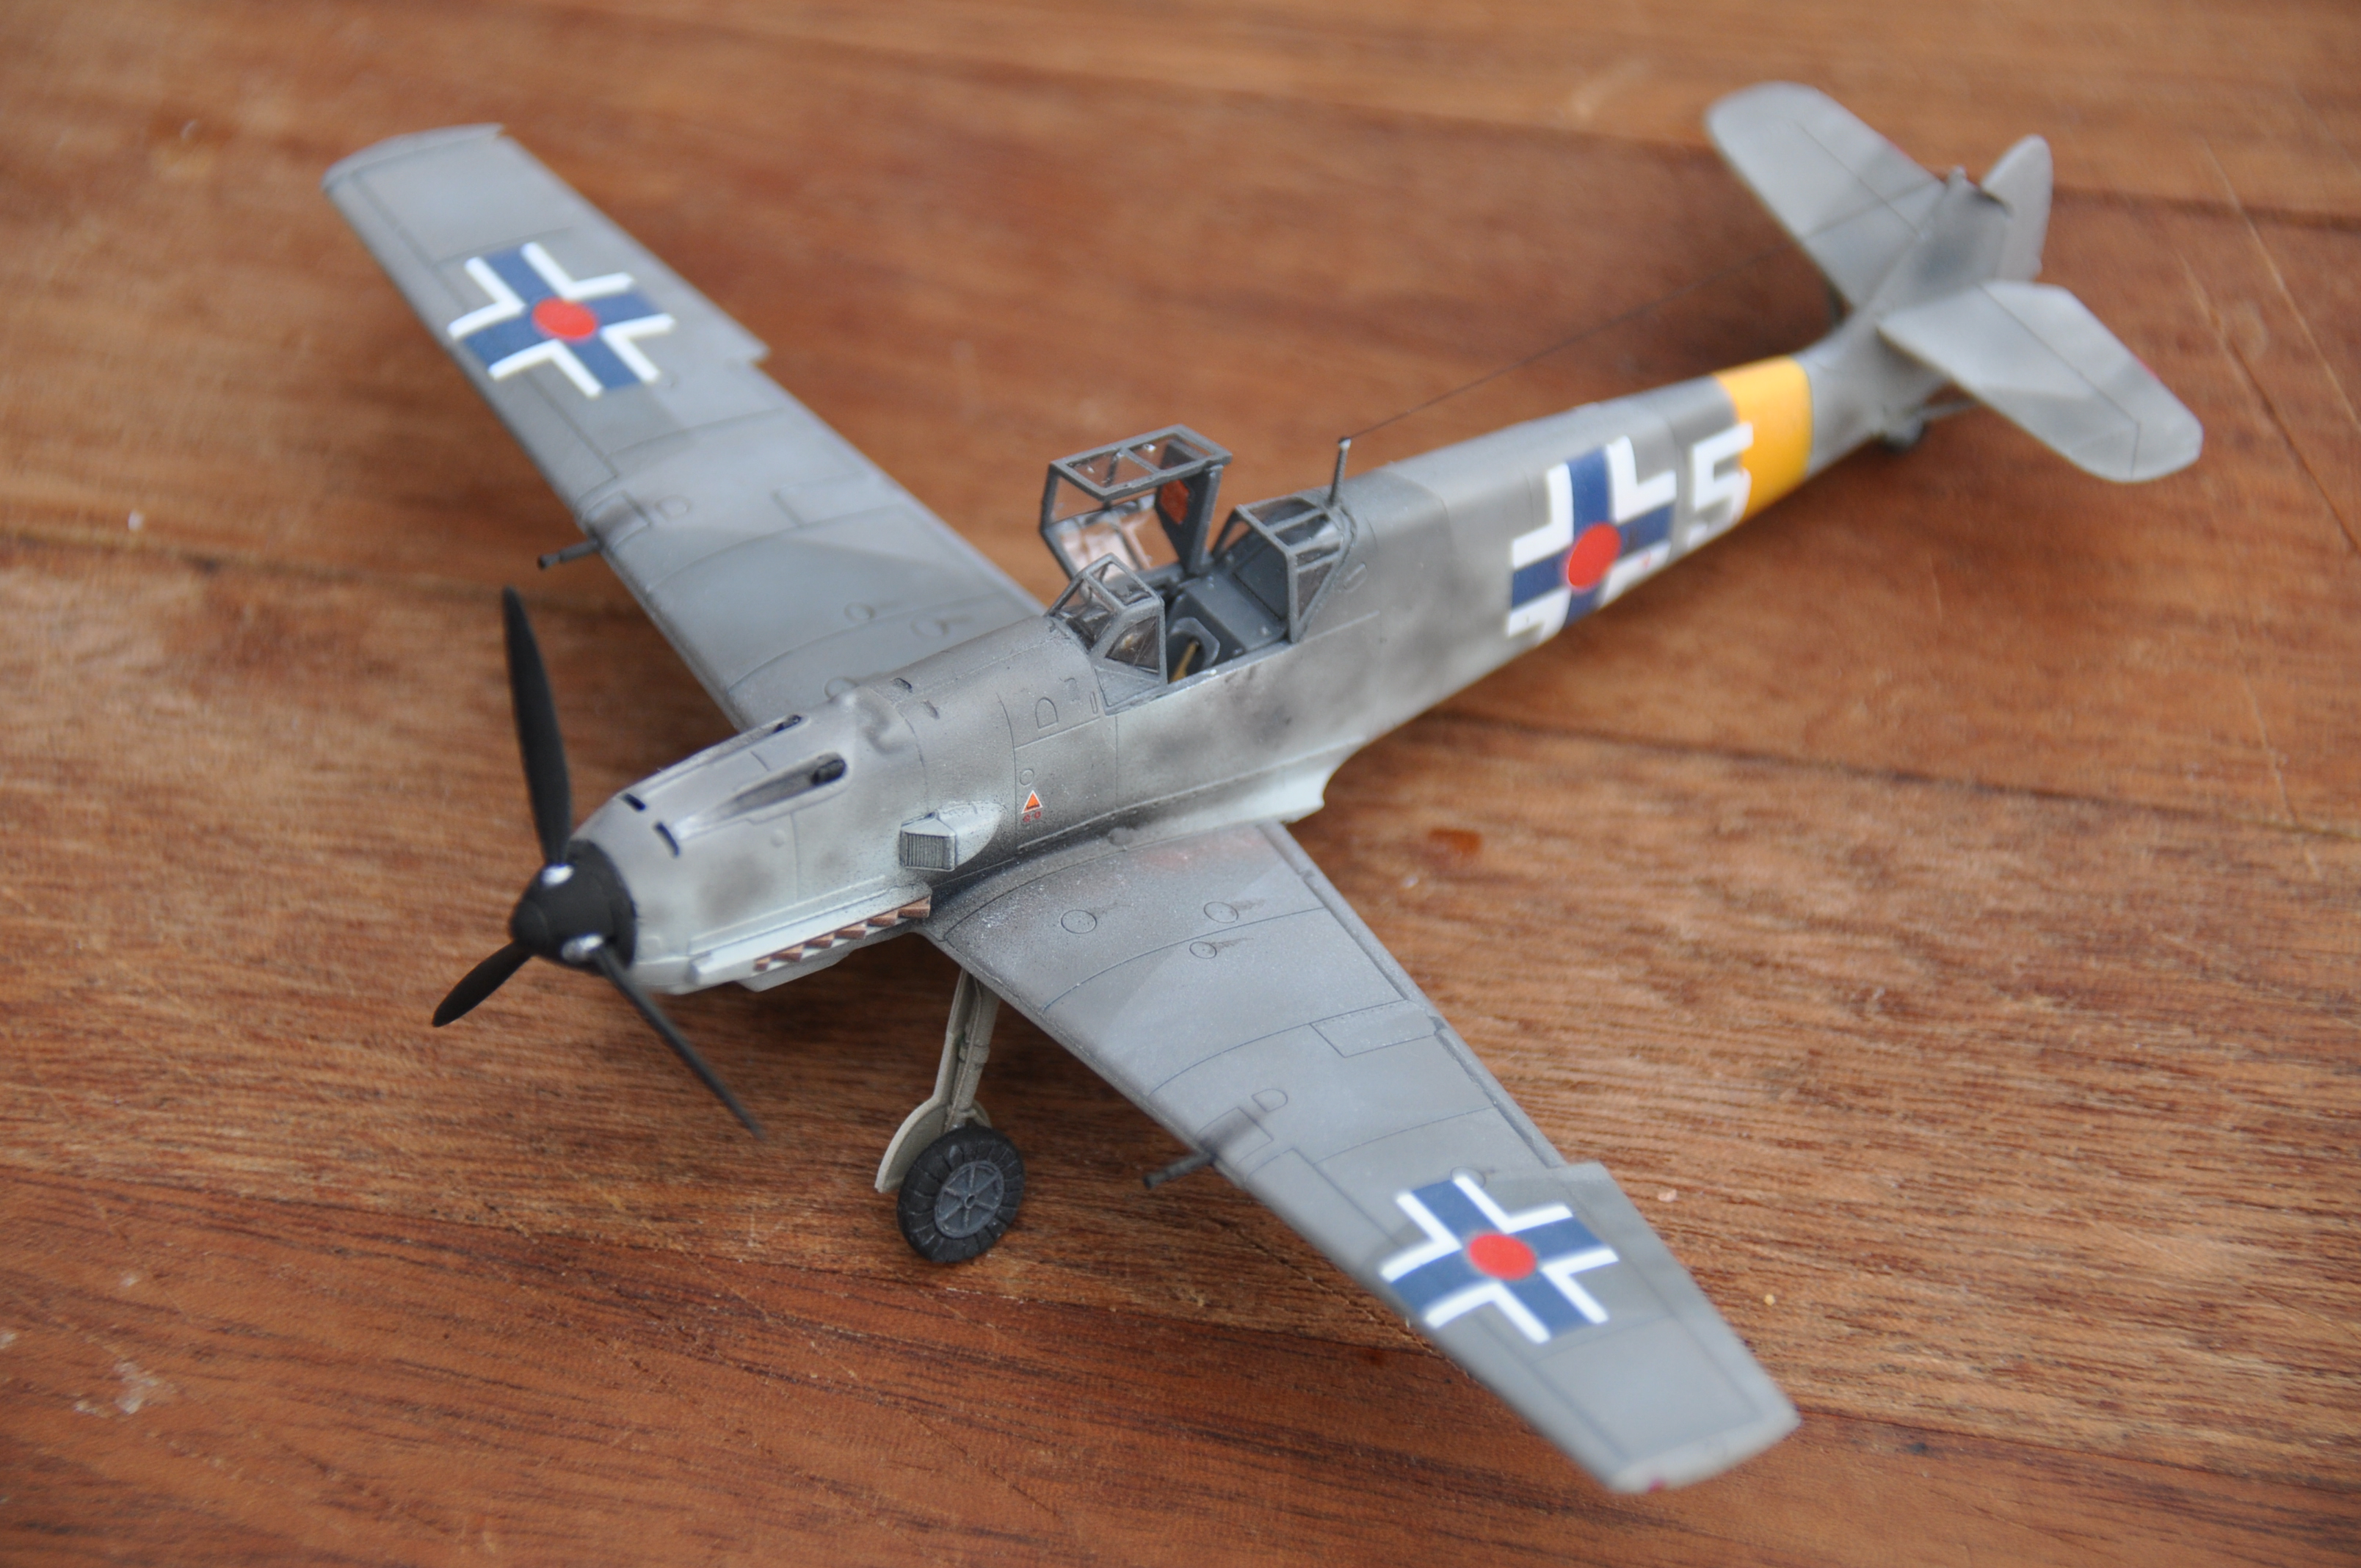 Bf 109 Slovaque (Airfix) - Page 2 13033008301315857811030531